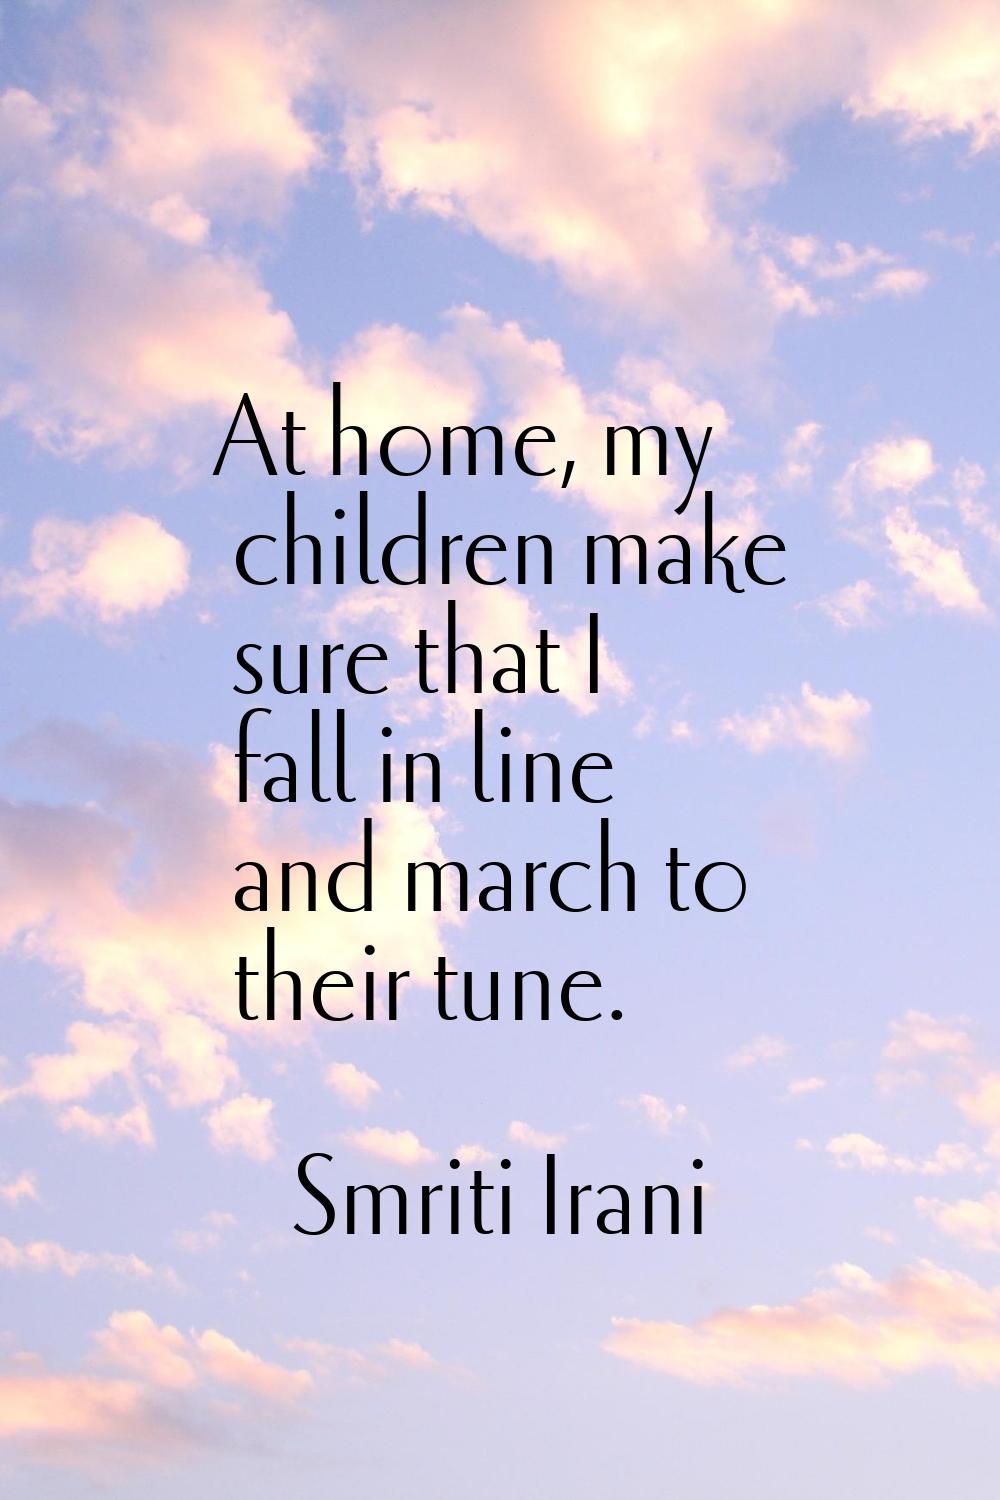 At home, my children make sure that I fall in line and march to their tune.